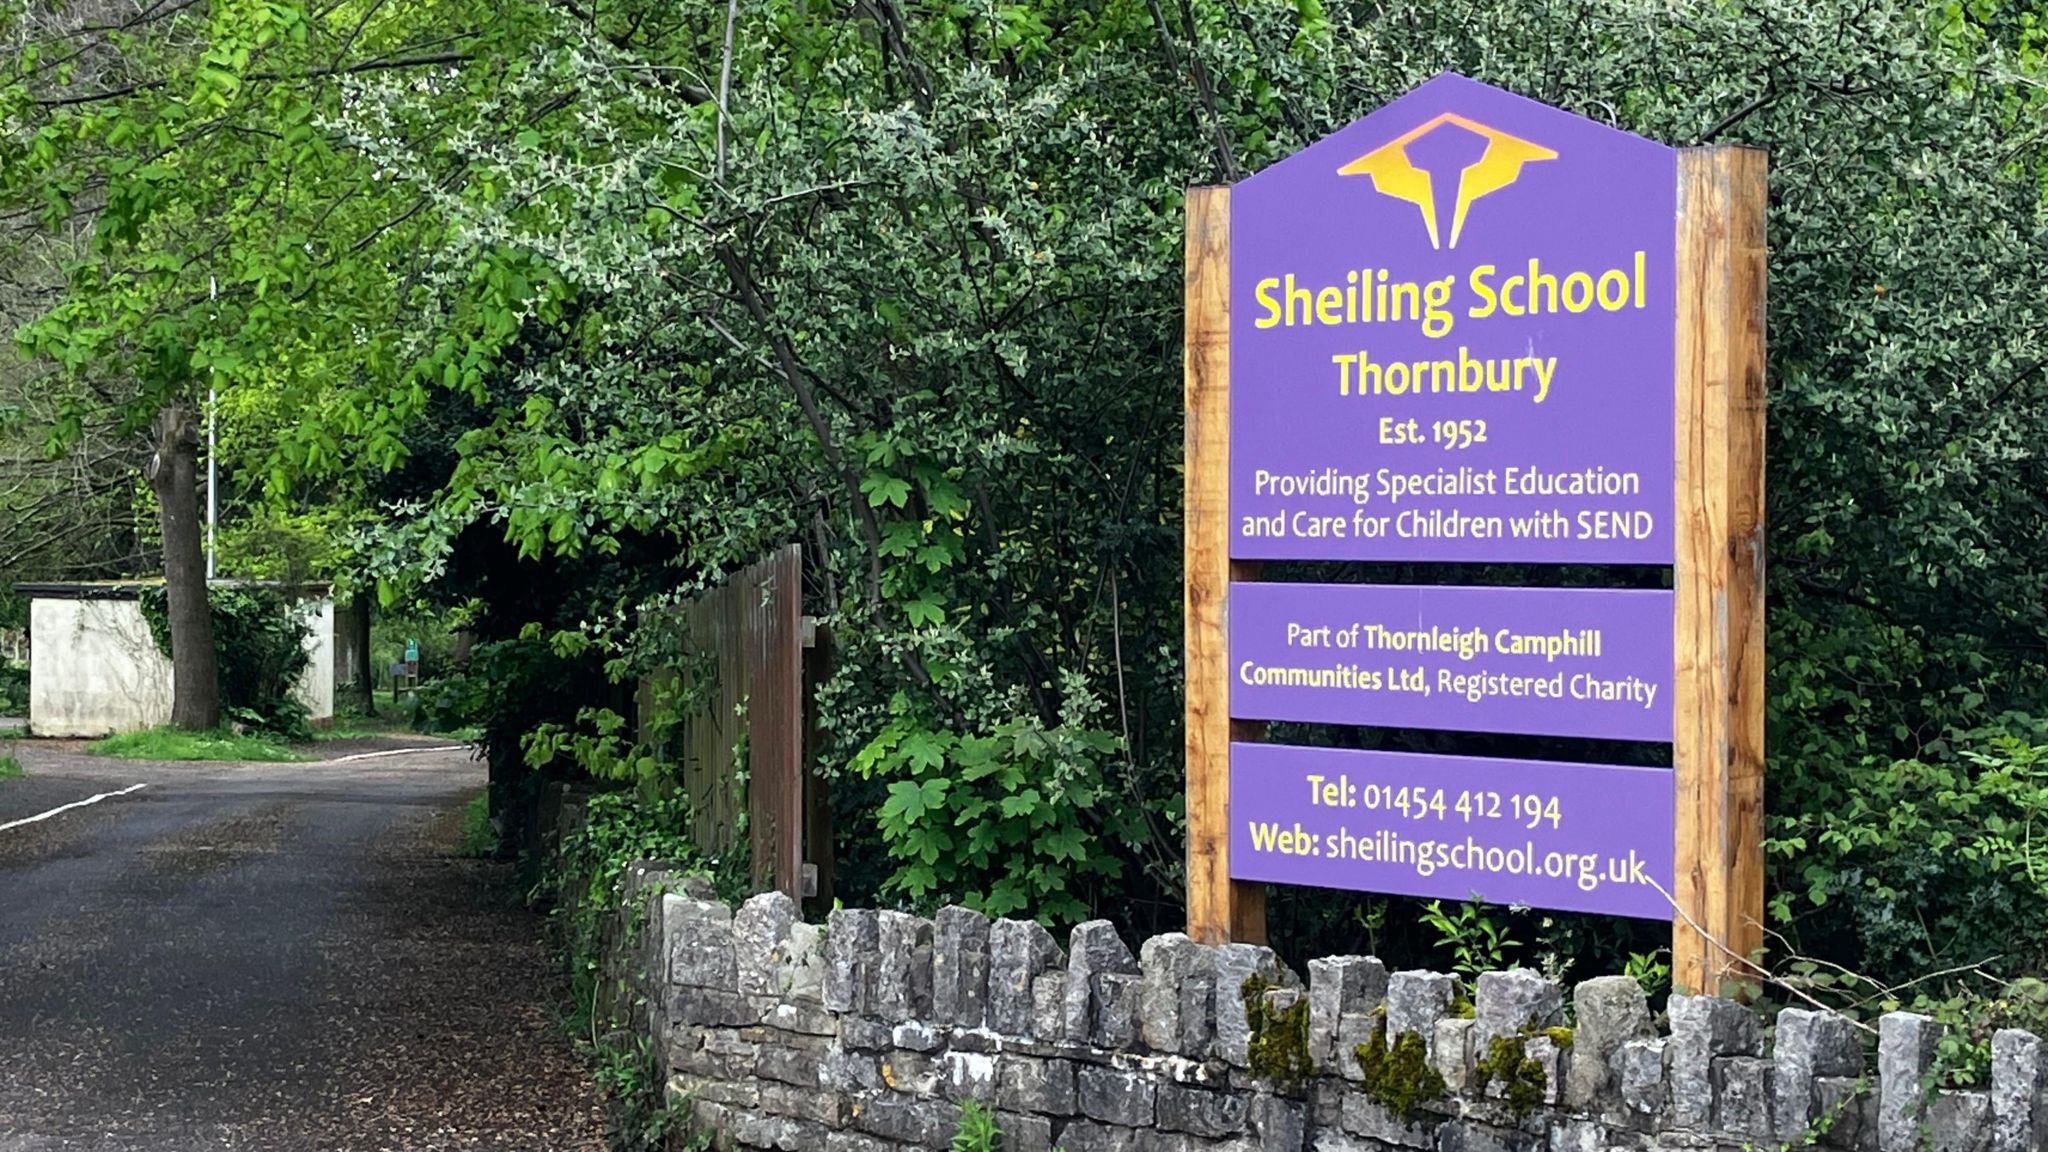 image of the outside of the Sheiling School in Thornbury